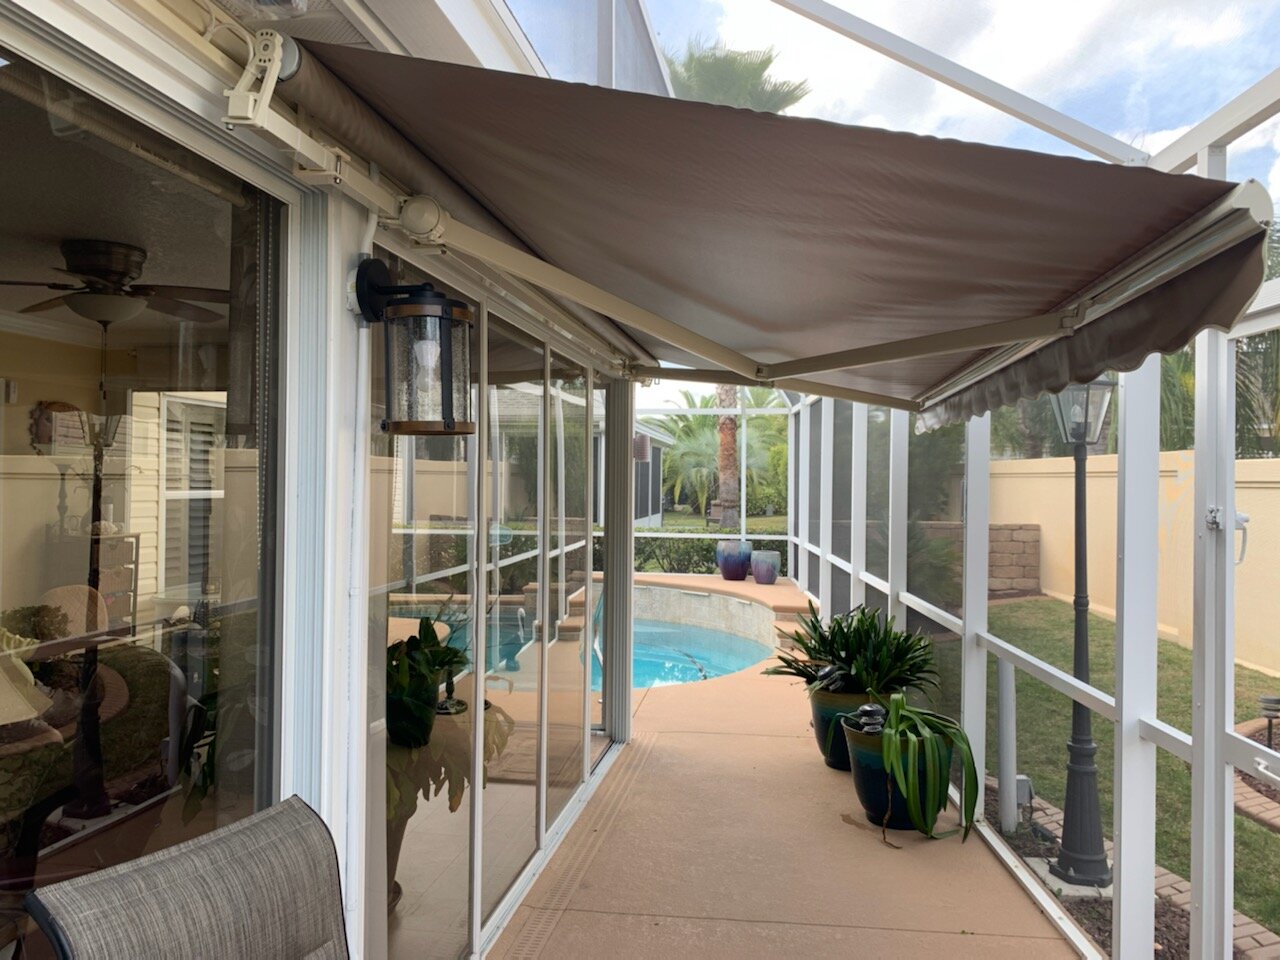 RETRACTABLE AWNINGS-SUNSETTER SHADES-RETRACTABLE CANOPY-SUNSETTERS SHADES-SUNSETTER AWNING